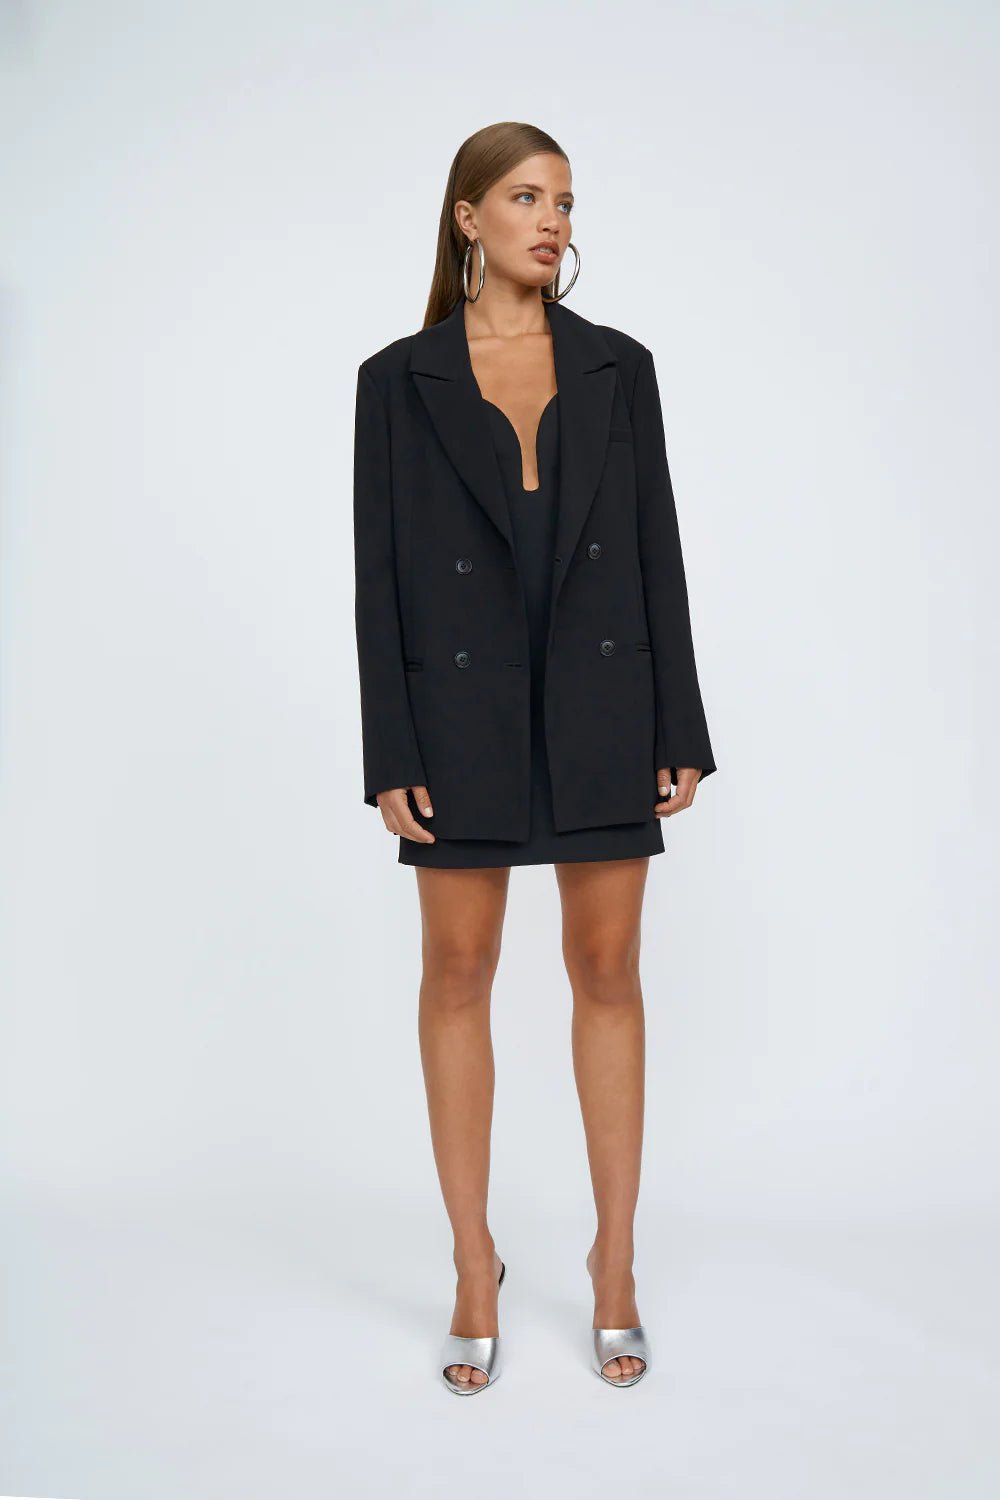 DINA DOUBLE BREASTED BLAZER - SUNDAY BEST TRADING CO